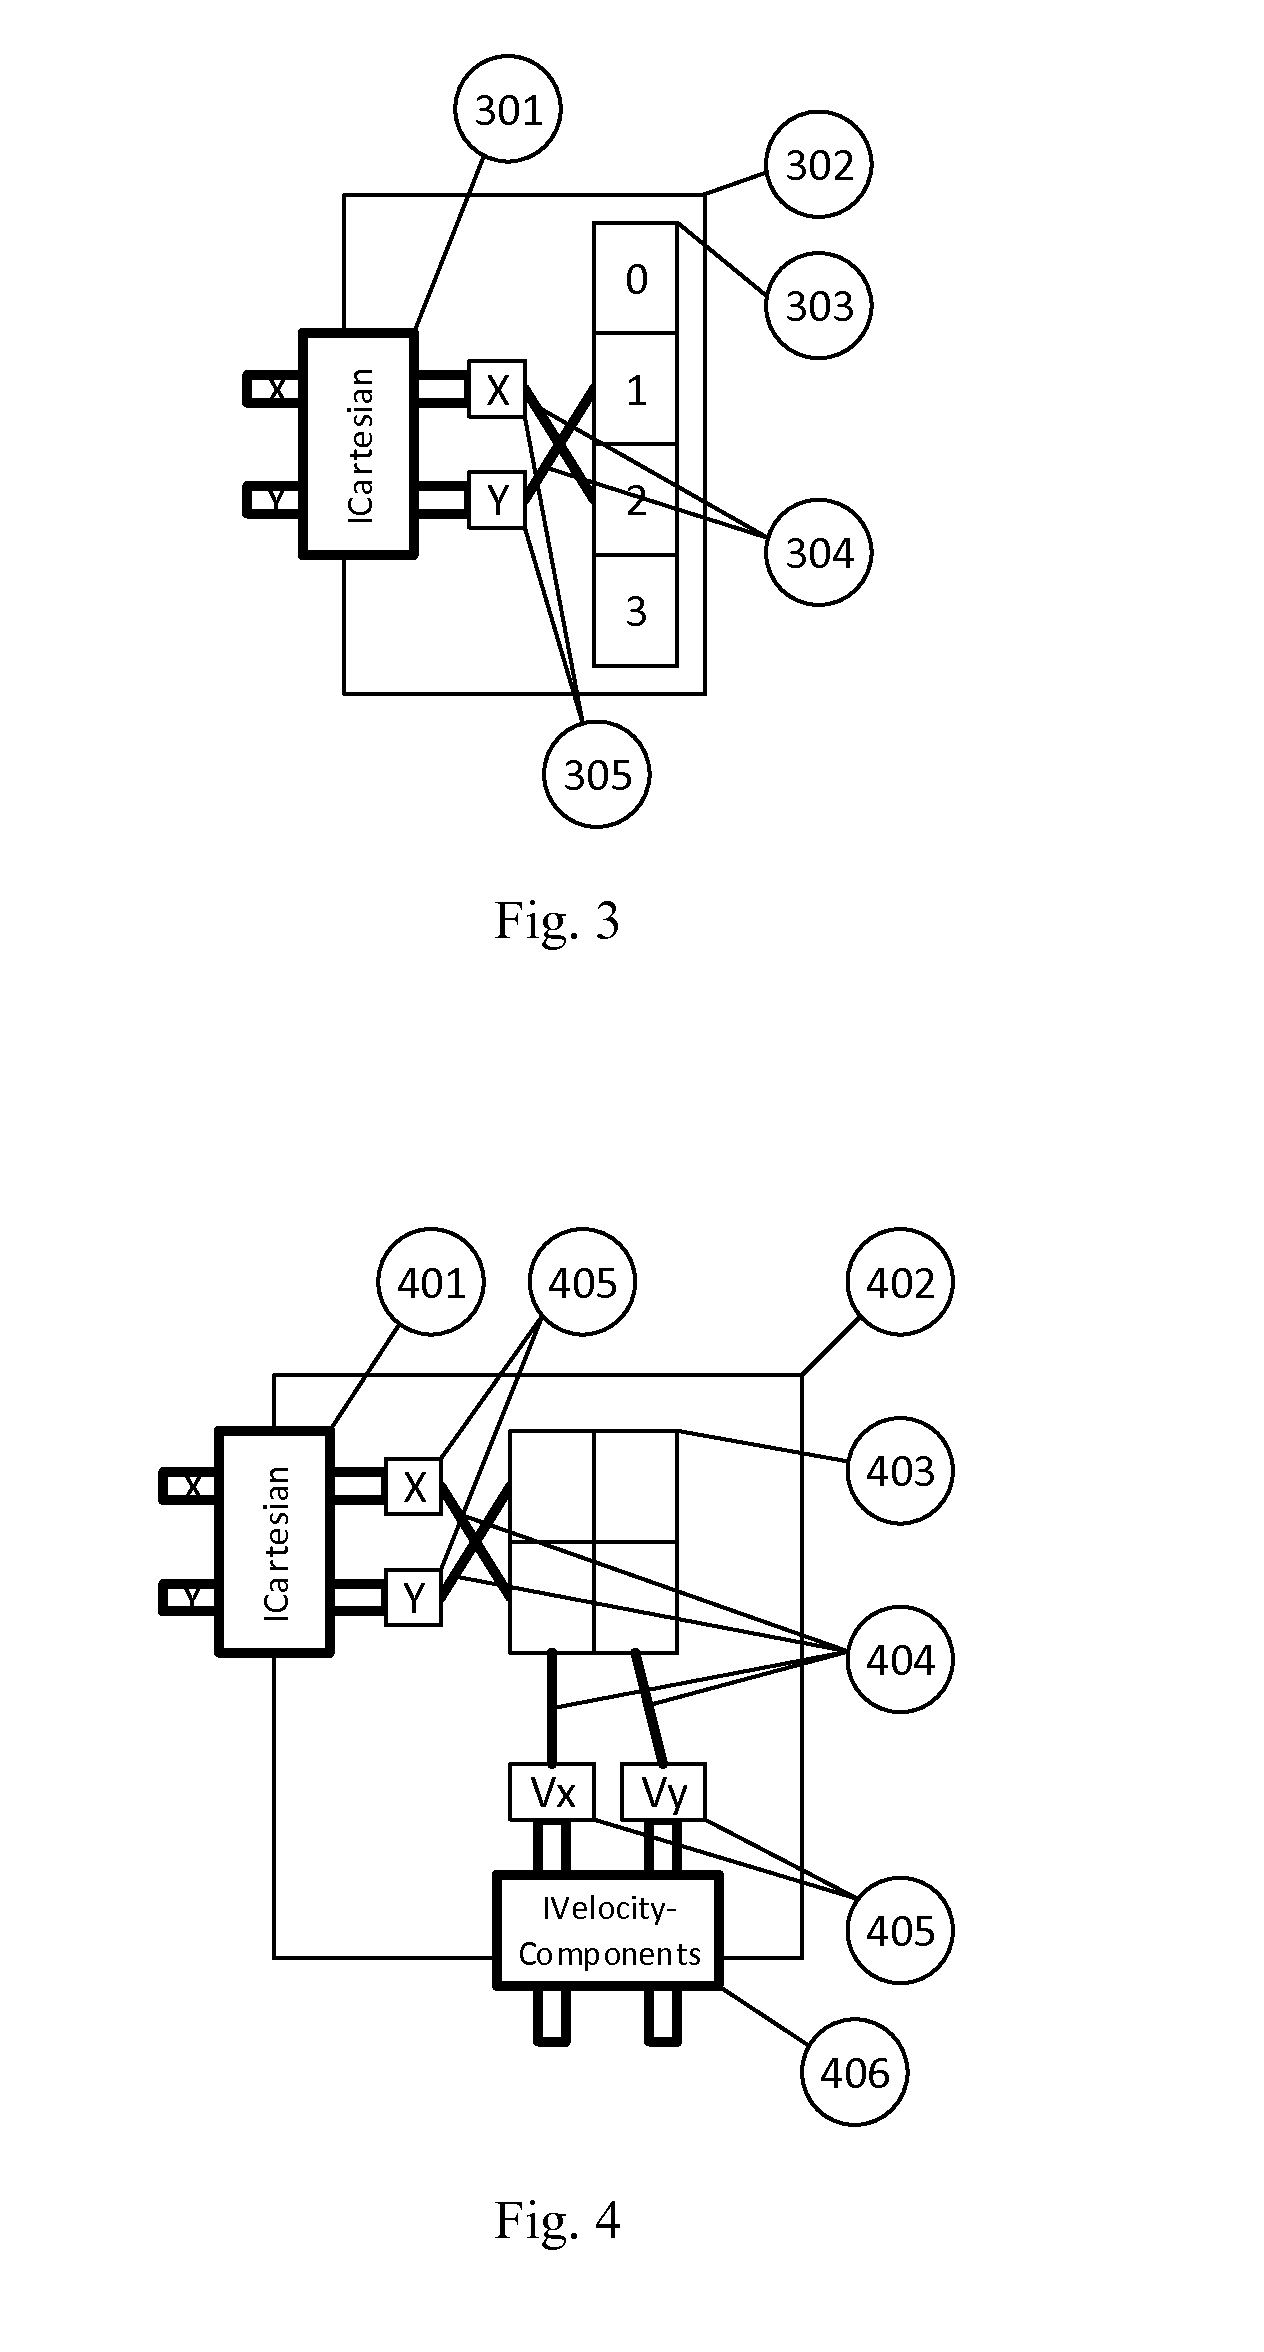 Method and apparatus for the tracking of multiple objects